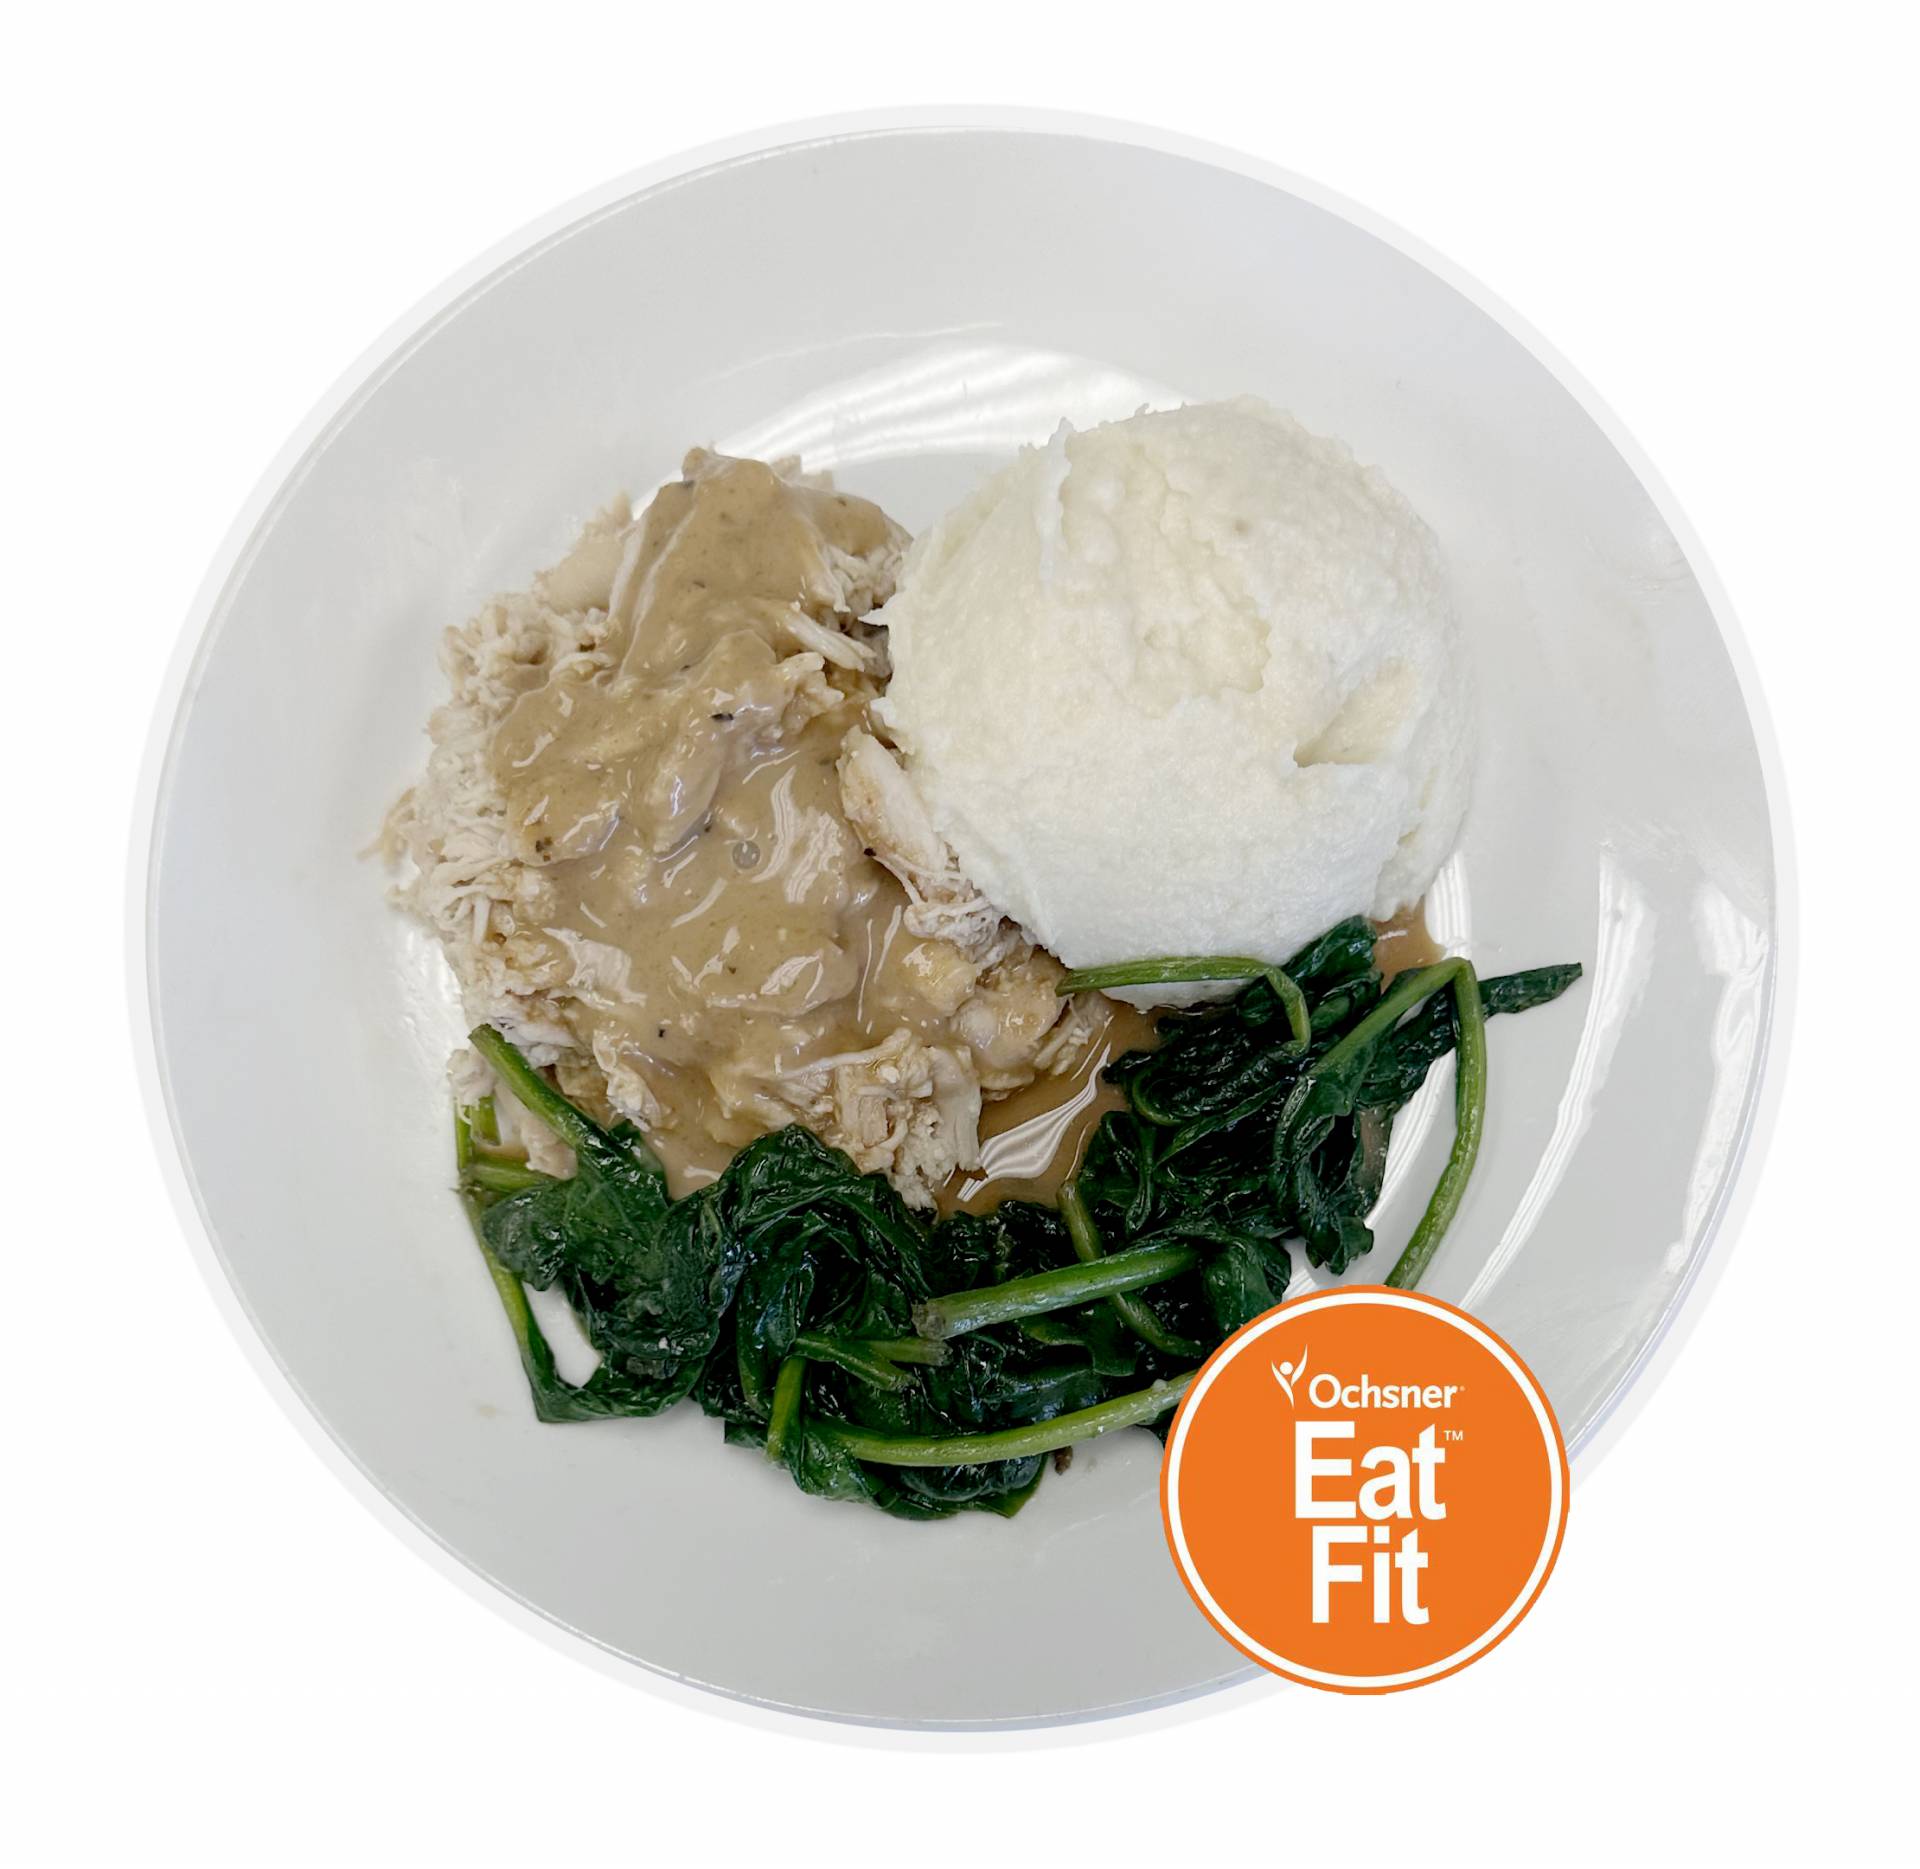 Smothered Chicken with Brown Gravy, Cauliflower Mashed Potatoes and Spinach - Low Carb